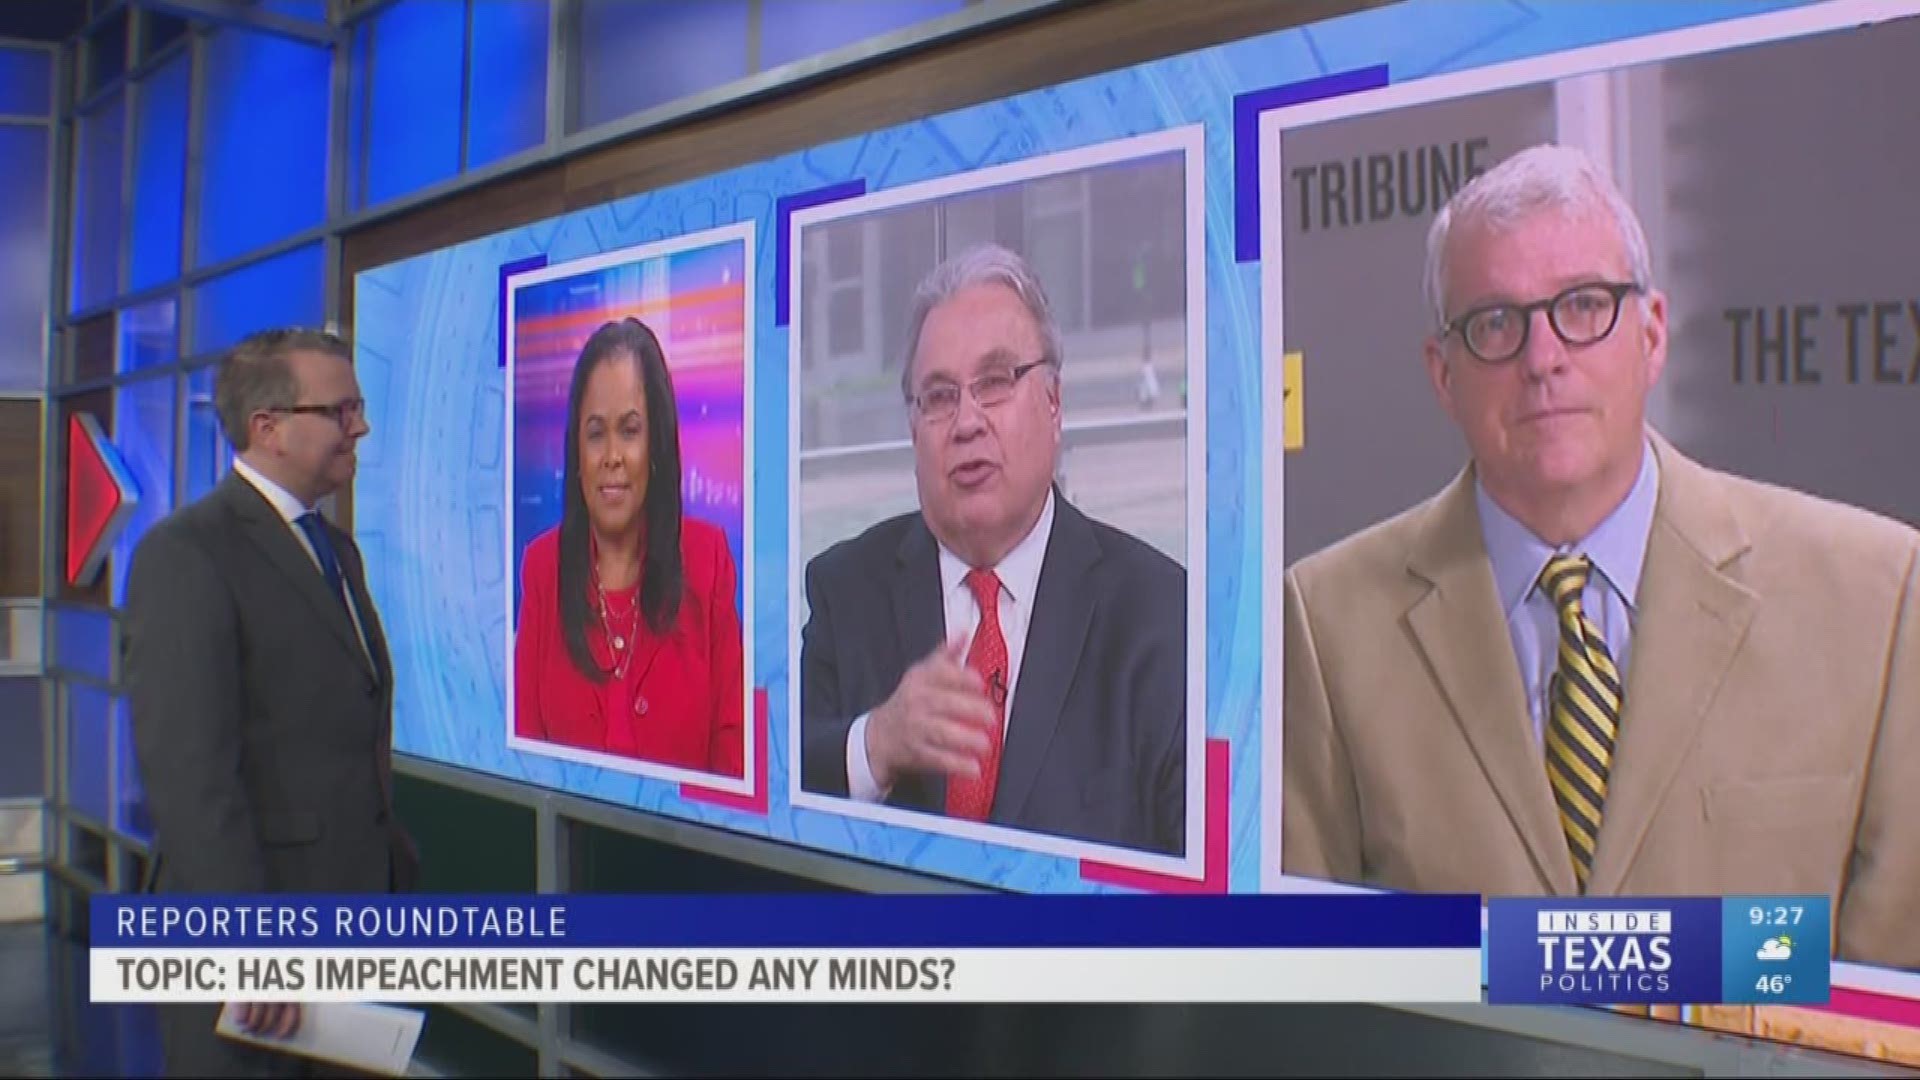 Ross Ramsey, Bud Kennedy, & Berna Dean Steptoe, WFAA's political producer, joined Jason Whitely to discuss Karl Rove being brought on to help Texas Republicans win.